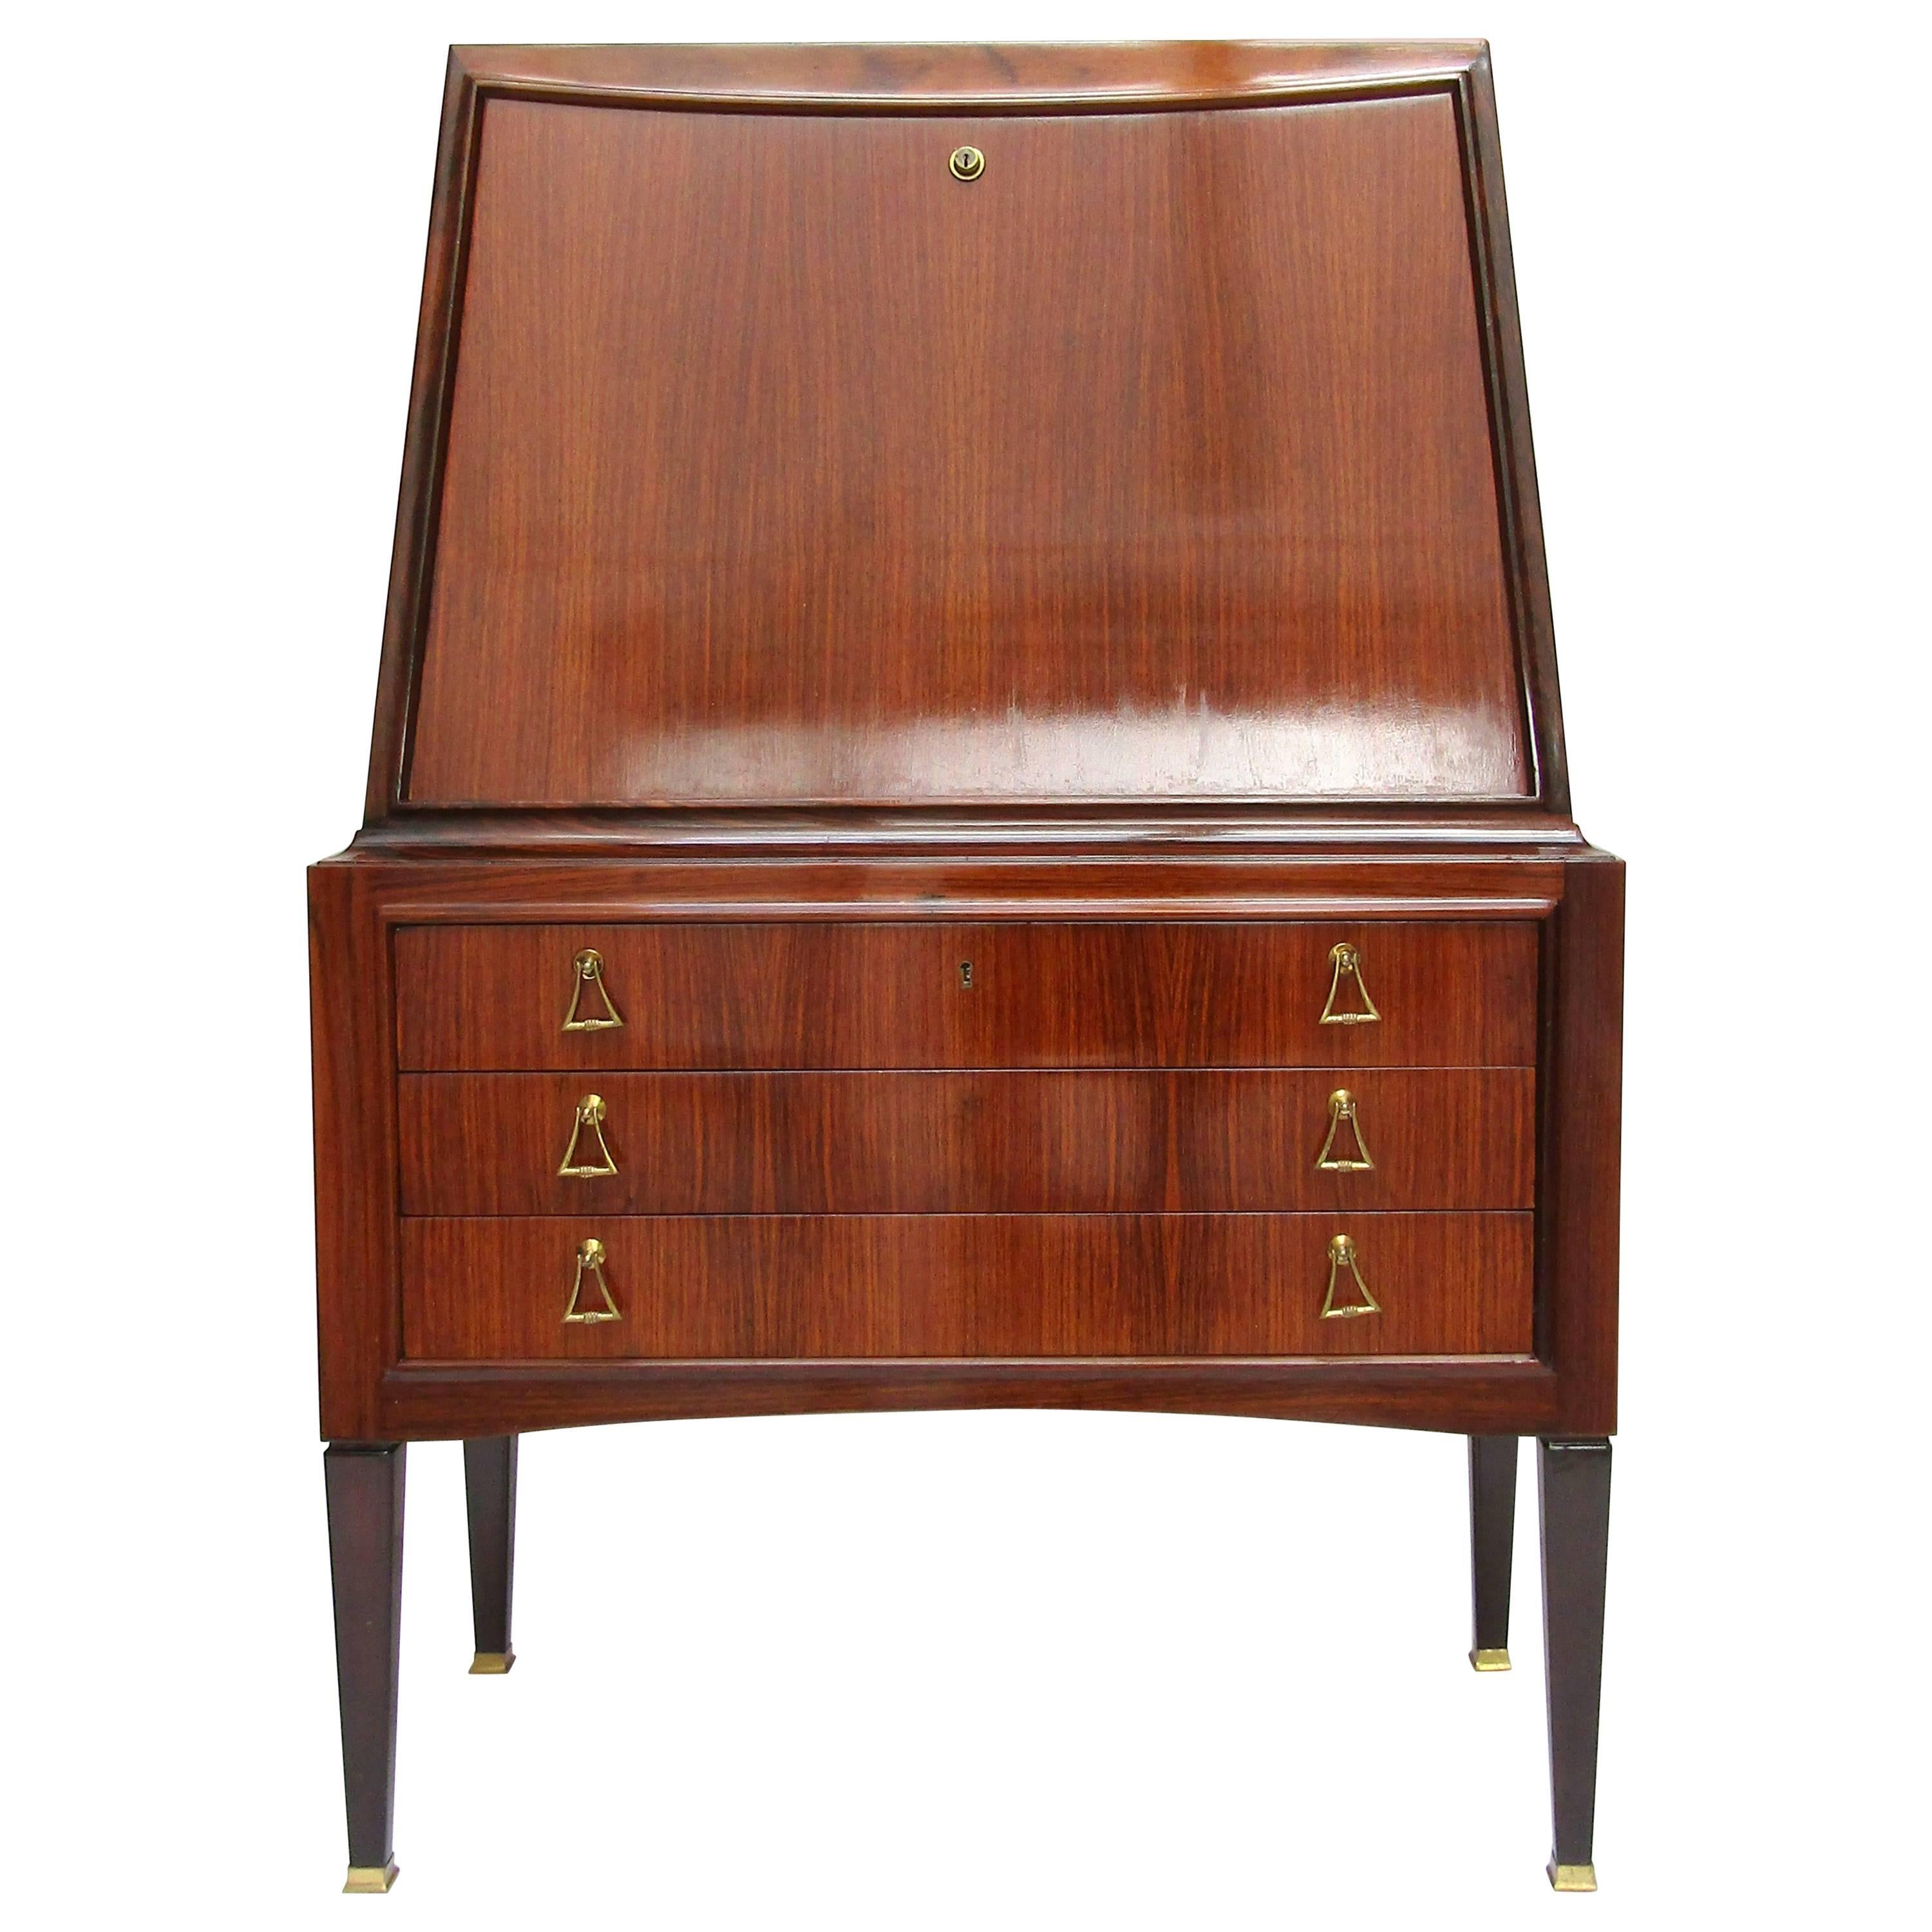 Italian, 1950s Drop Front Cocktail Cabinet